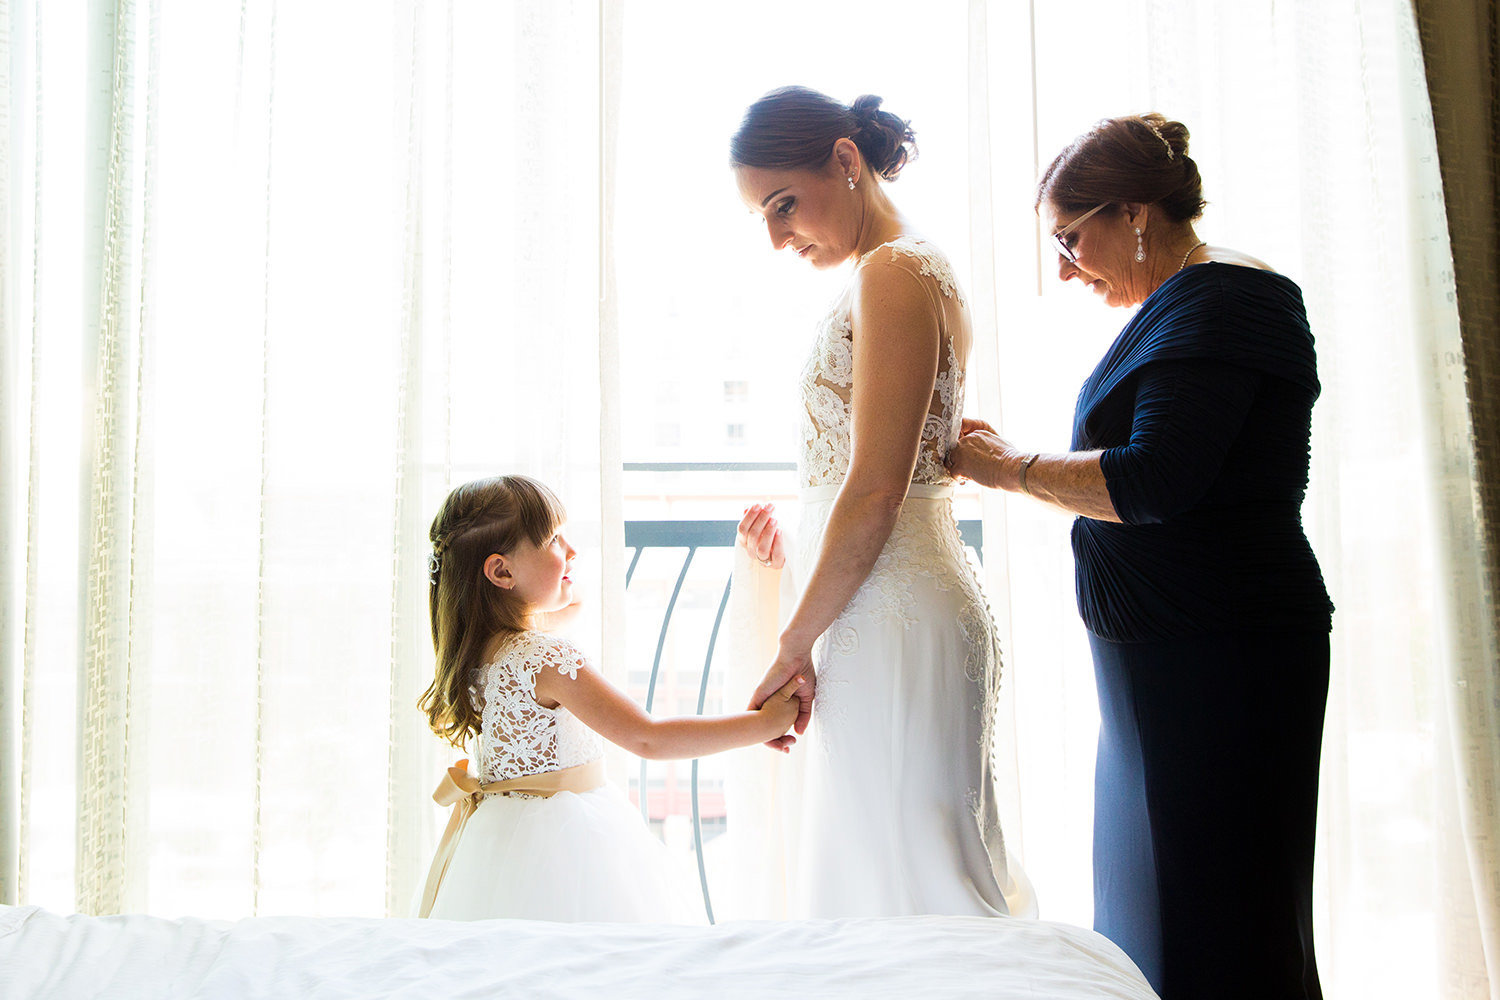 Beautiful moment between the bride and her mother and flowergirl